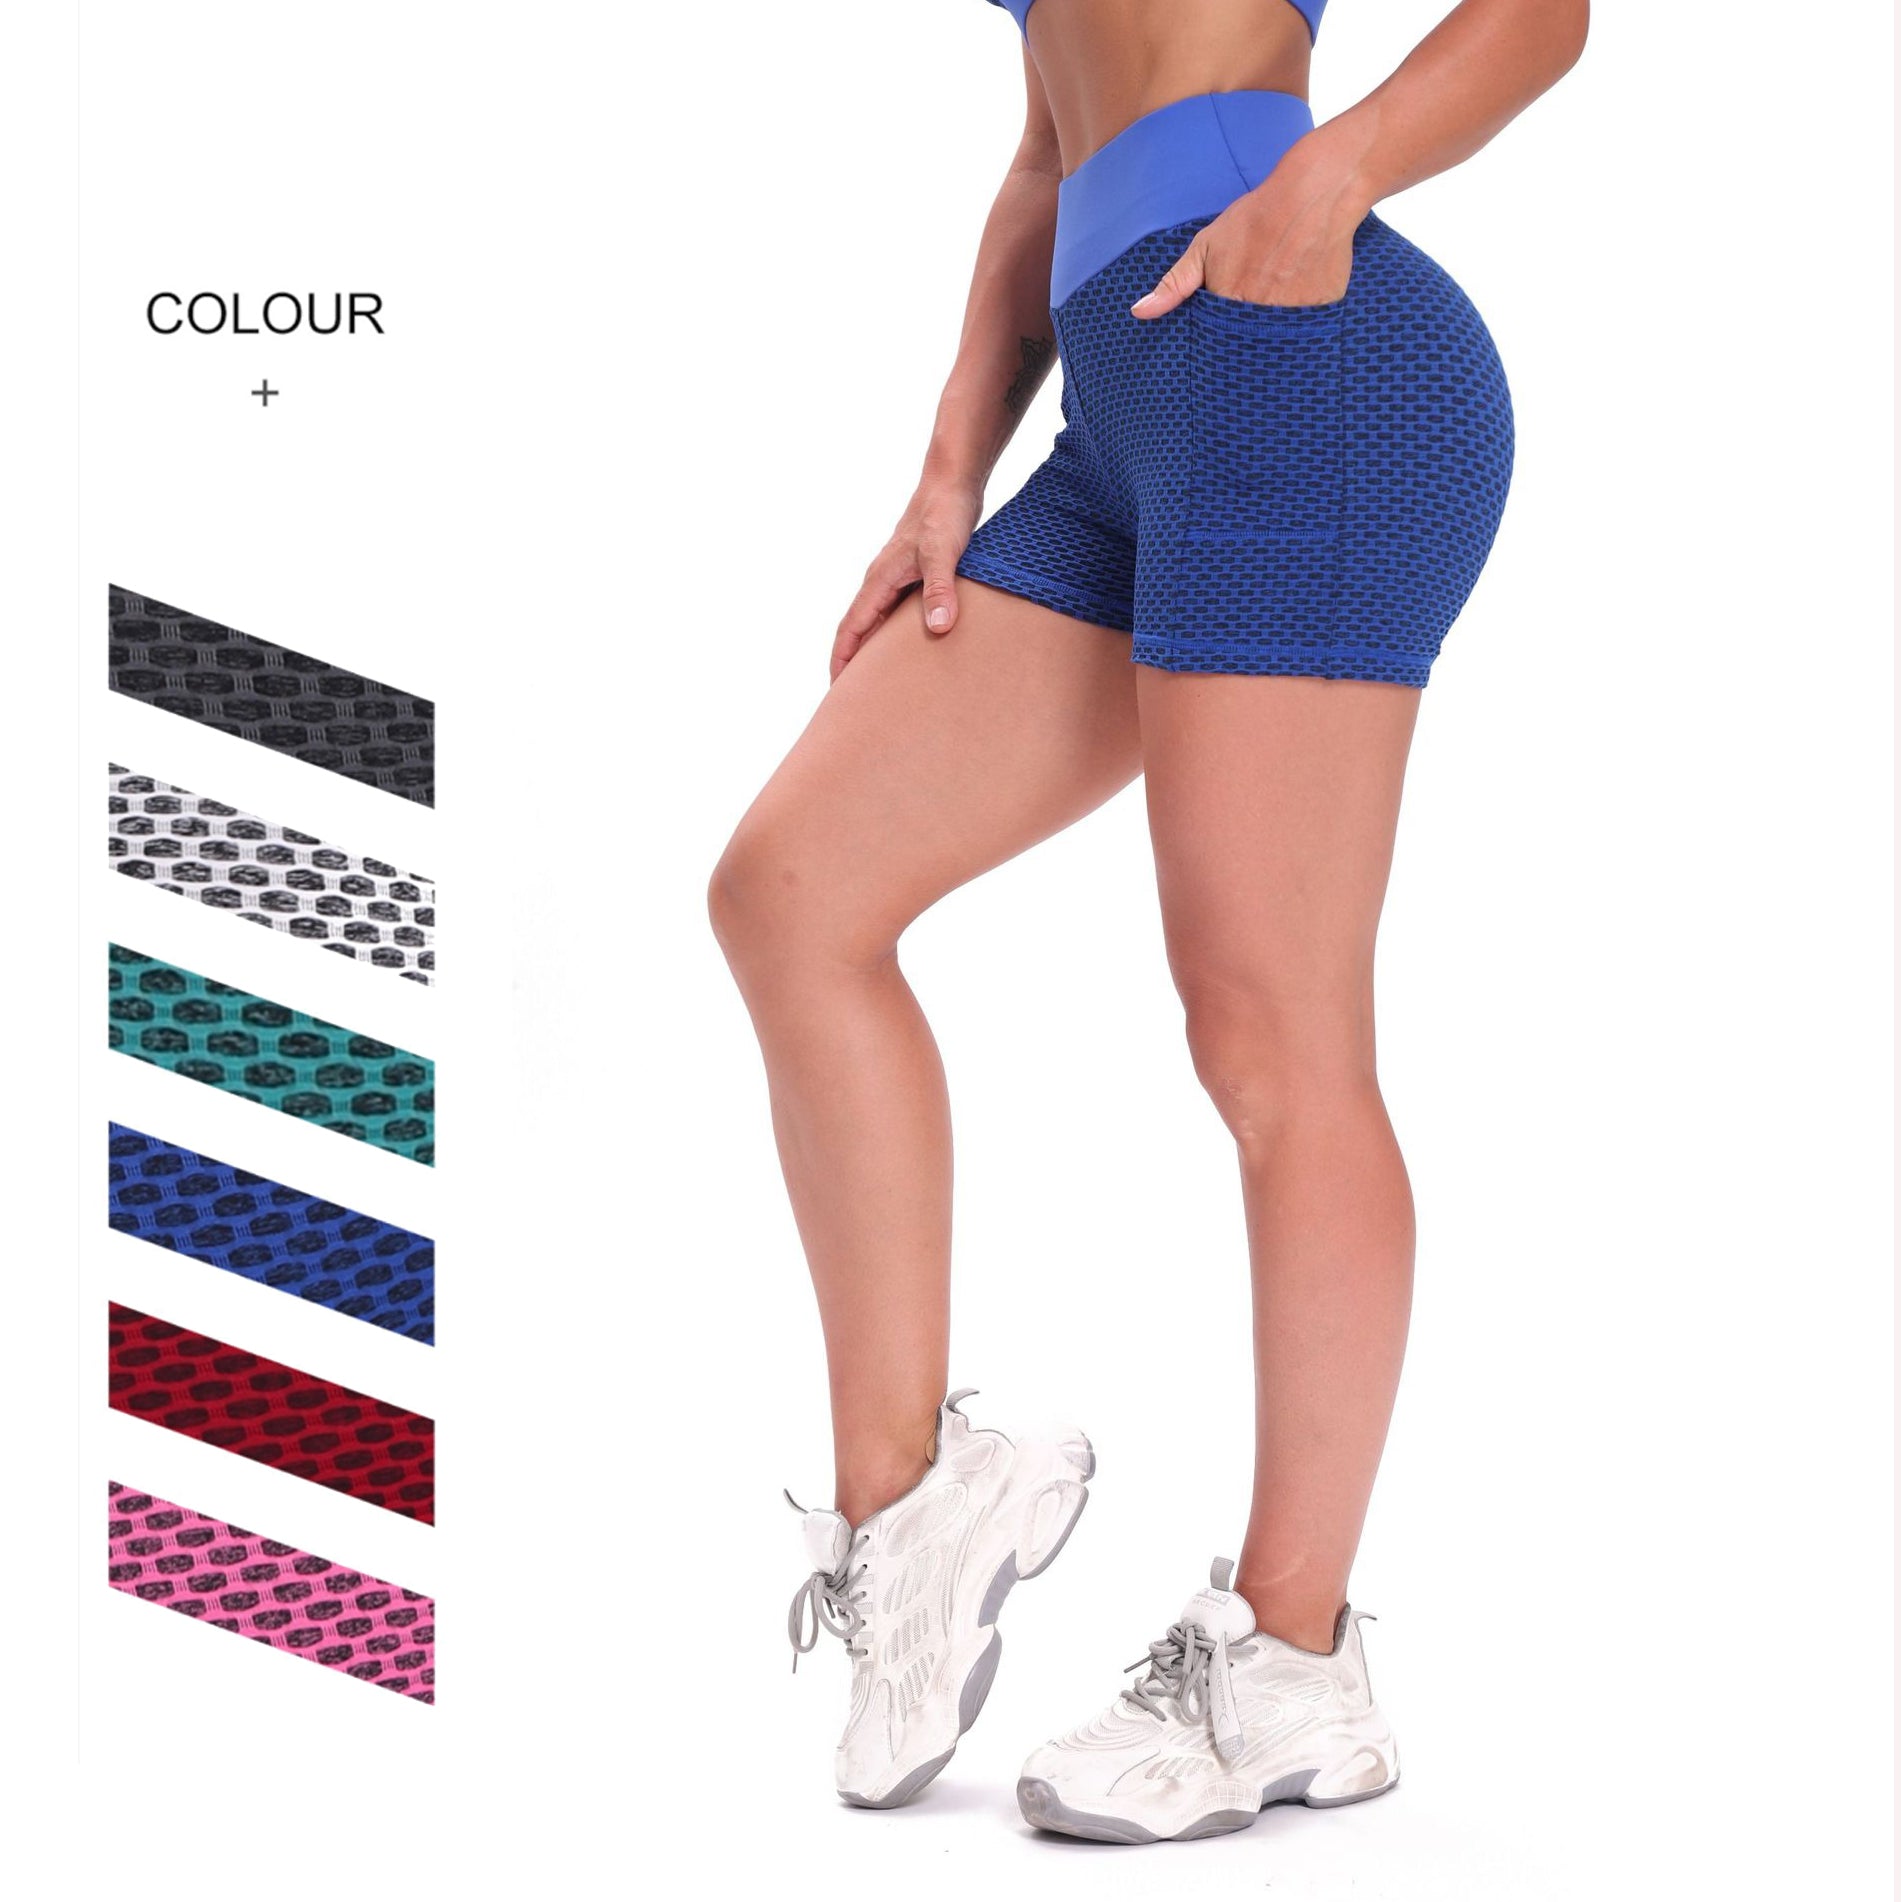 HIgh Waisted  mesh/Honeycomb Legging with pocket color chart.jpg